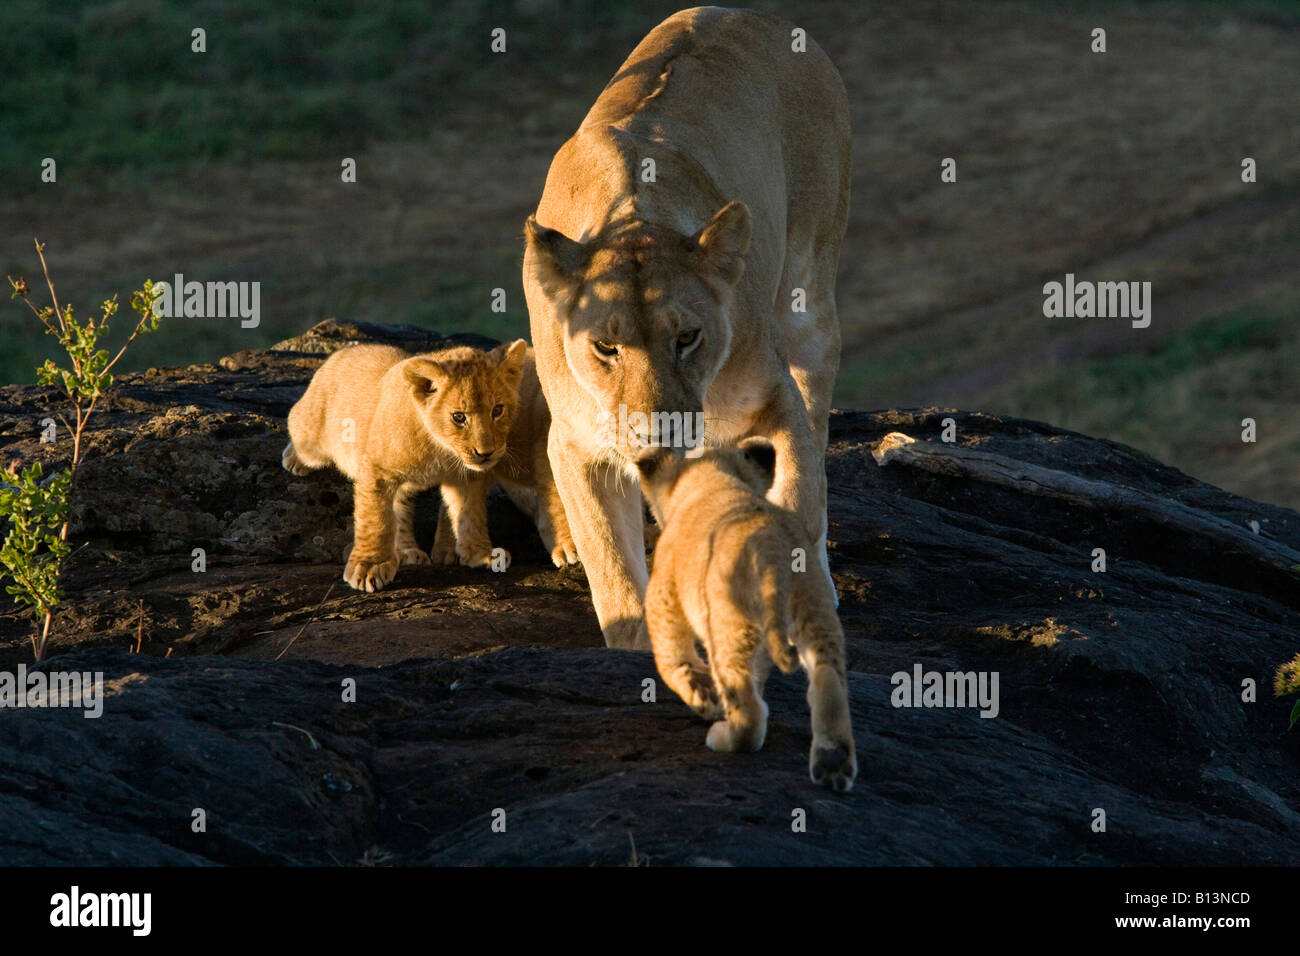 Lioness and two cubs watch intently as third cub approaches Side light early morning sunlight shines across their faces Stock Photo